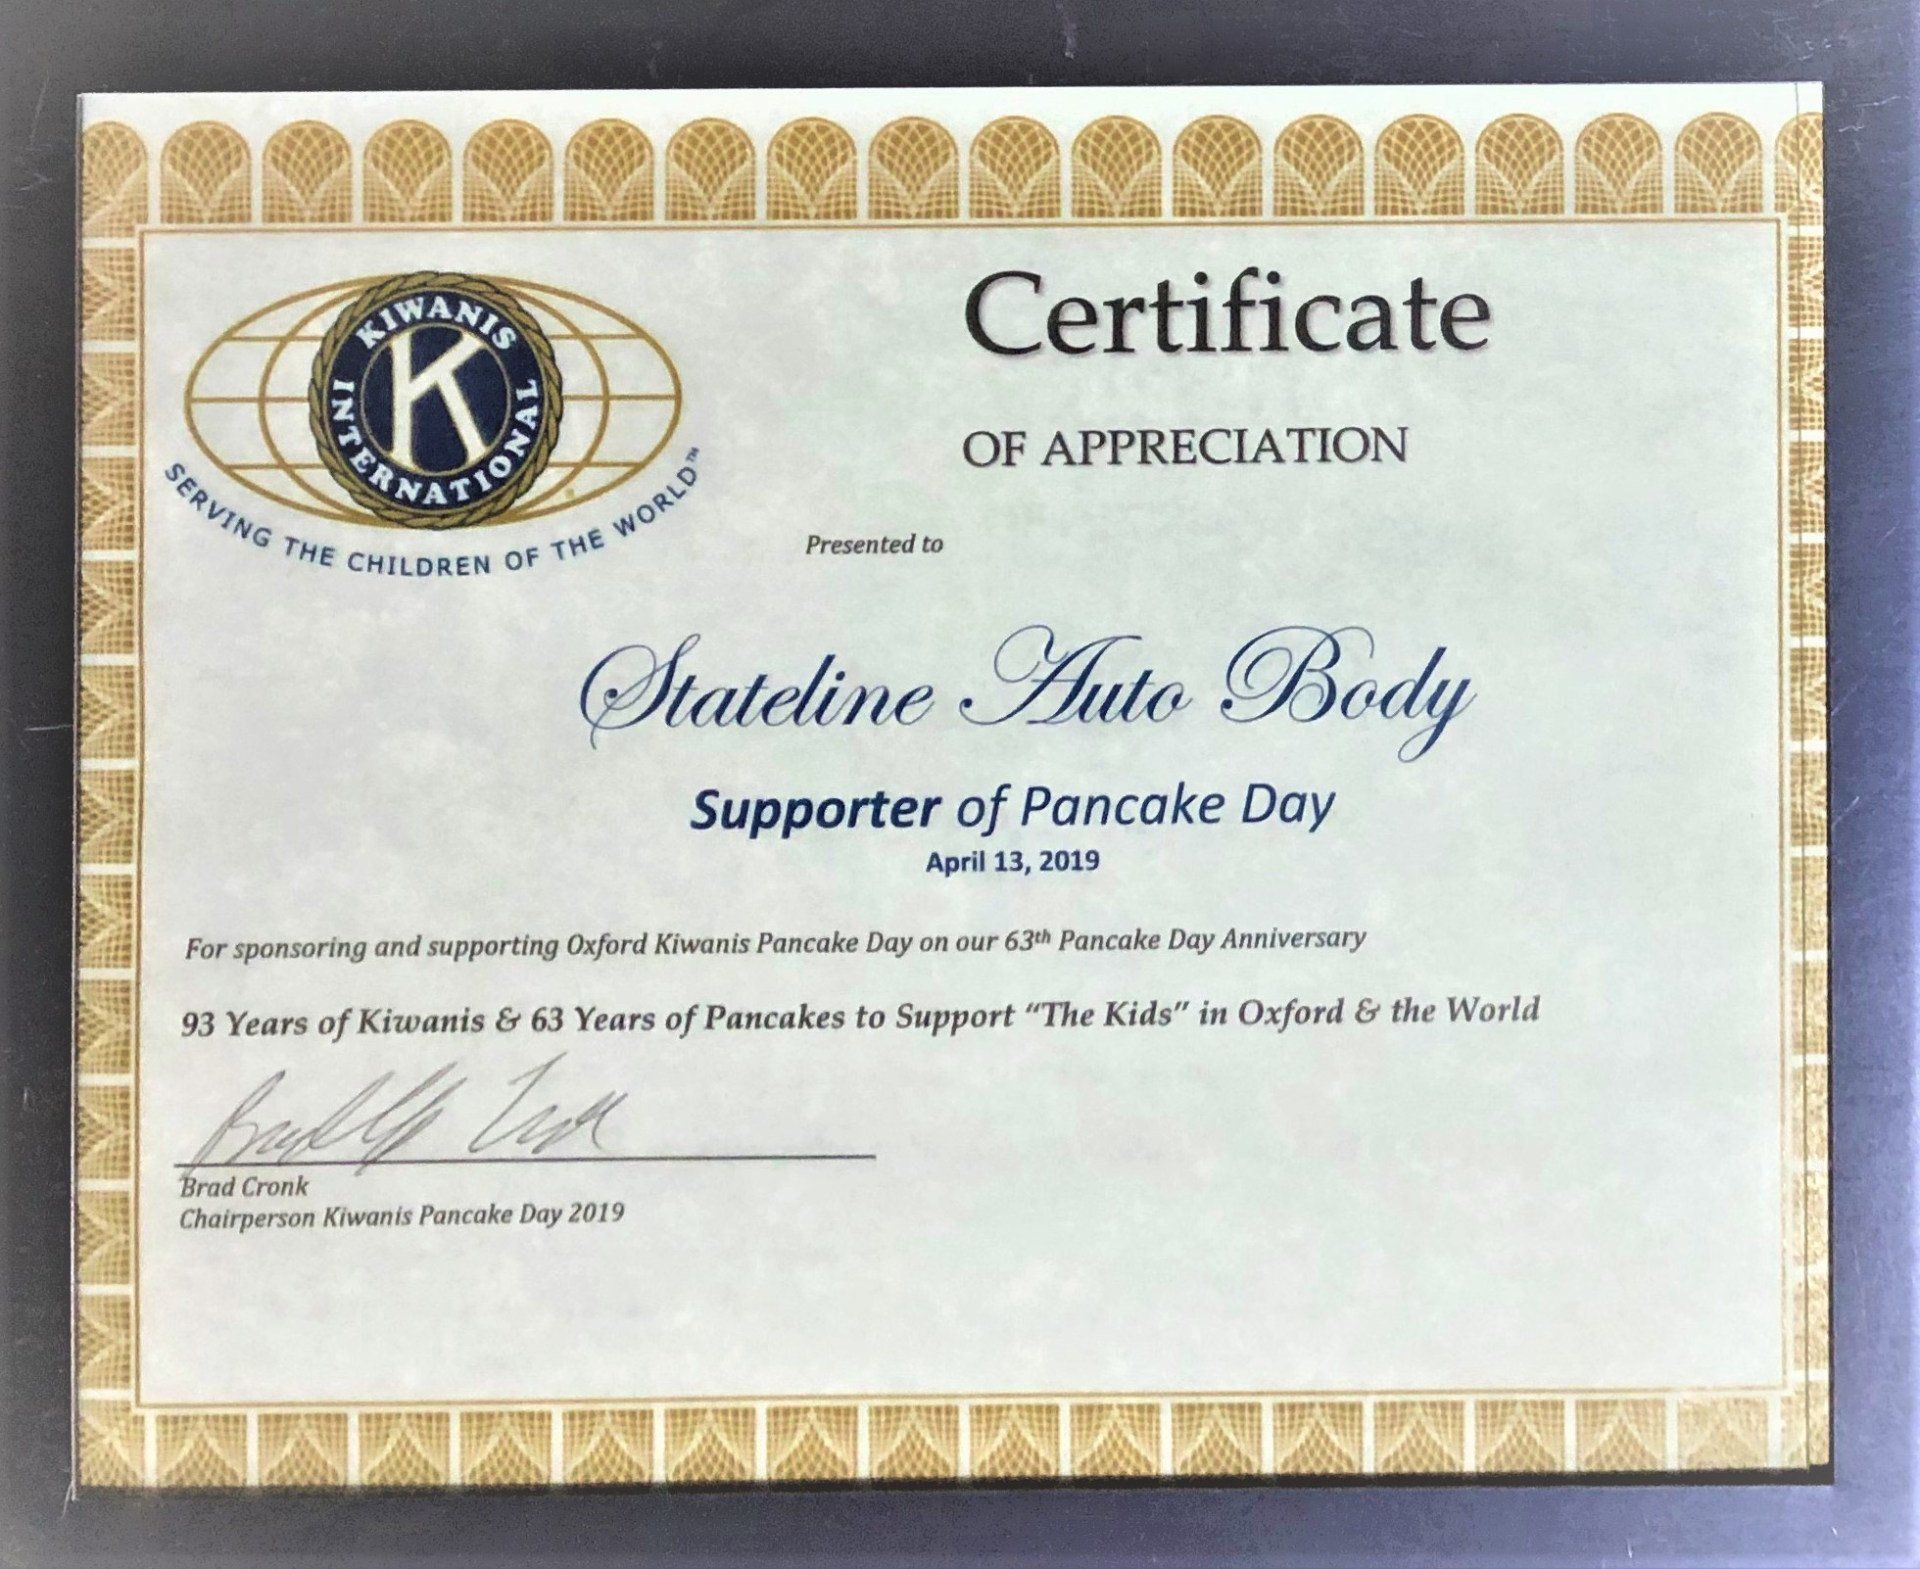 Certificate from Kiwanis — Oxford, OH — Stateline Auto Body